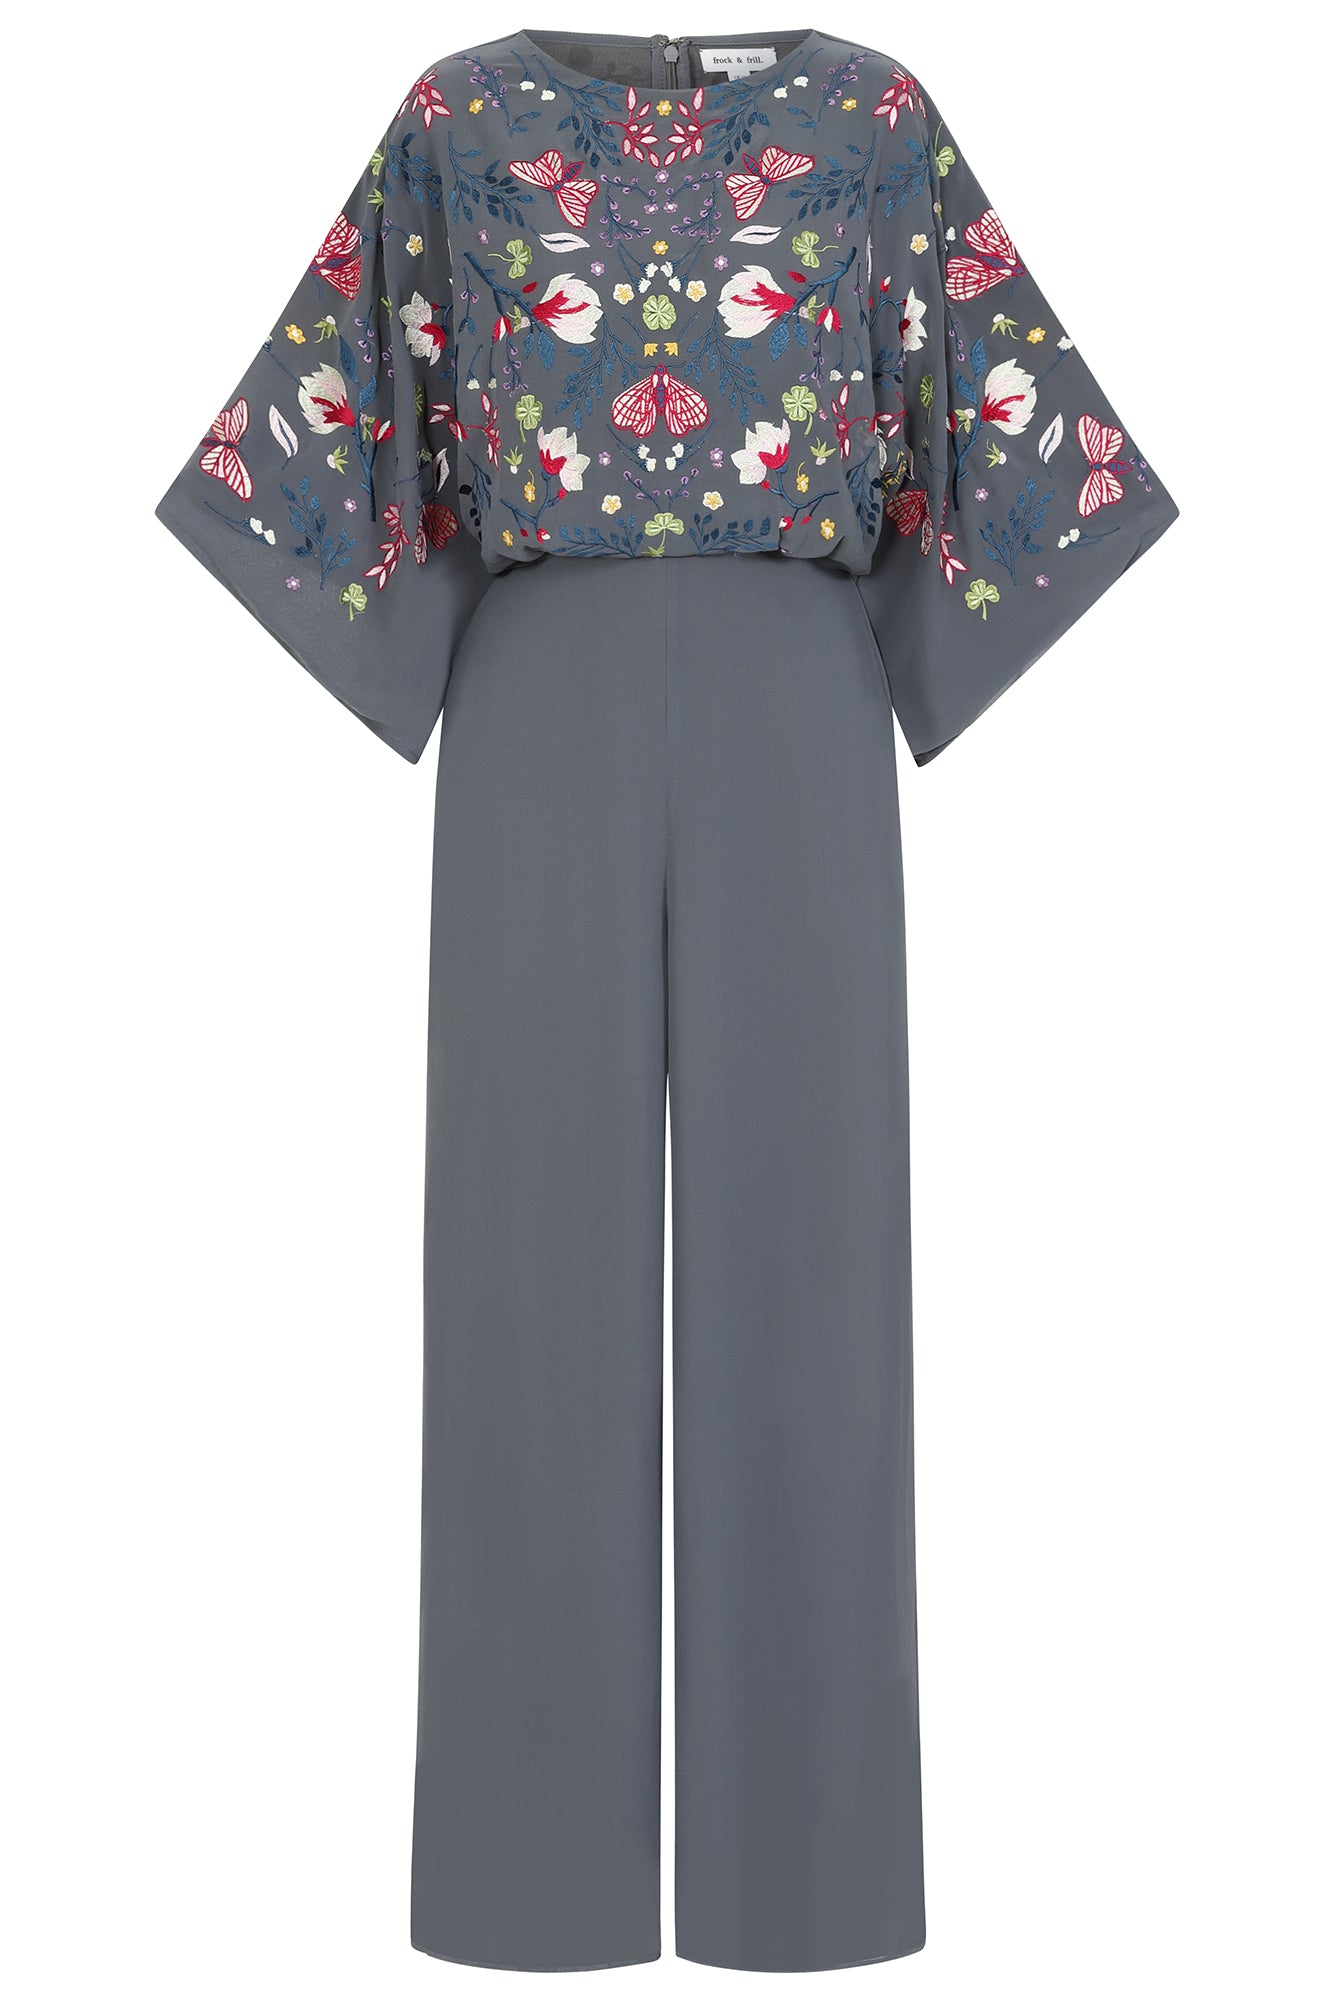 Women’s Grey Yareli Floral Embroidered Jumpsuit - Charcoal Medium Frock and Frill